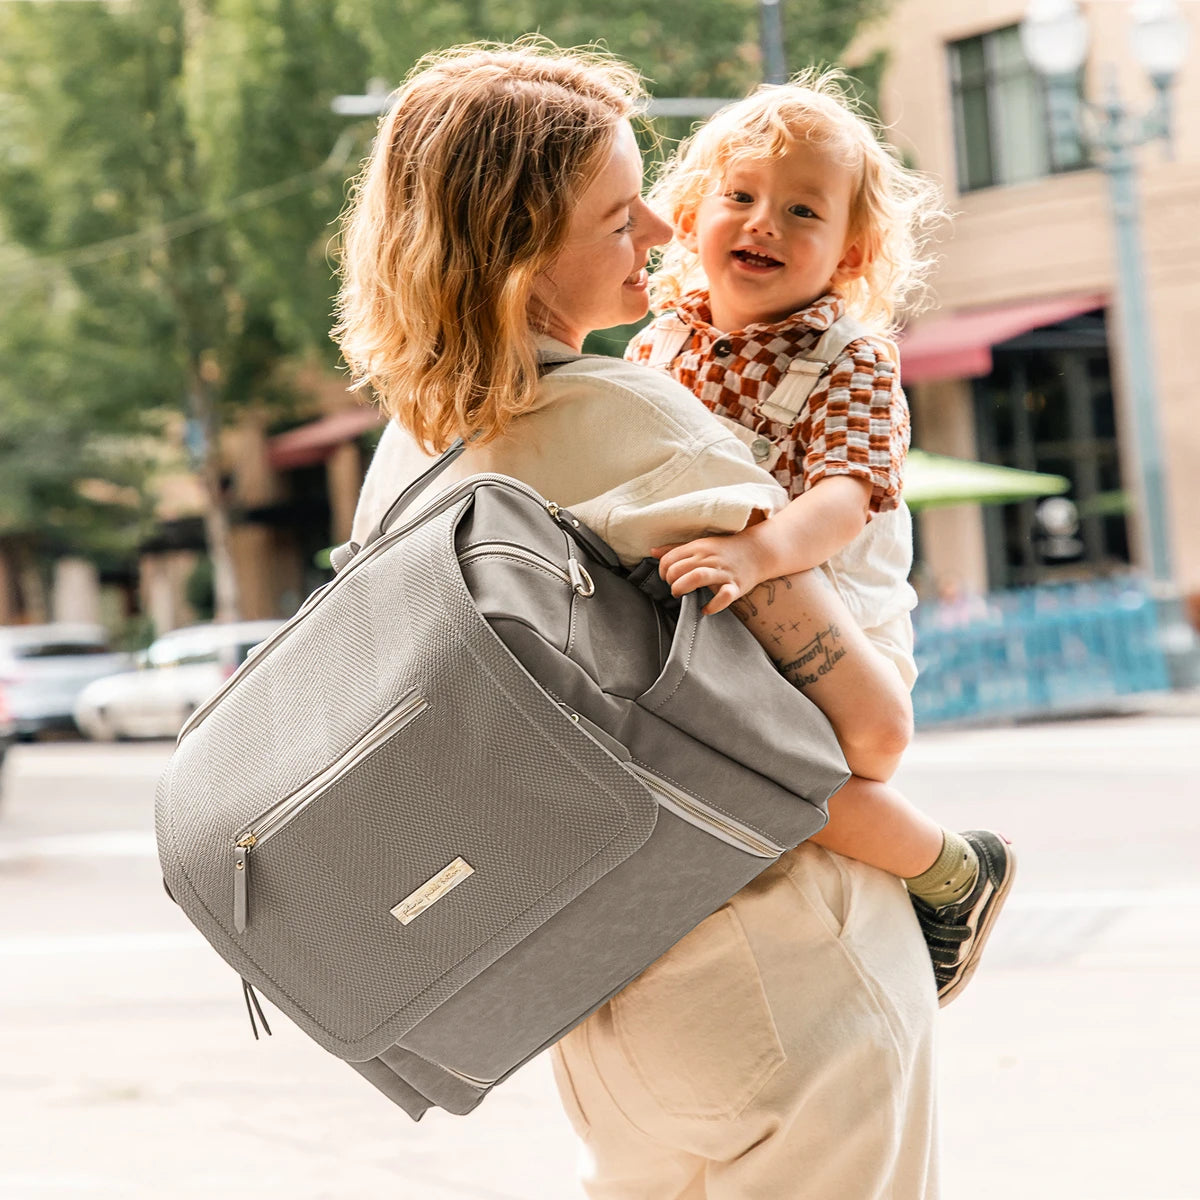 mom wearing the boxy backpack deluxe in sand cable stitch while holding baby